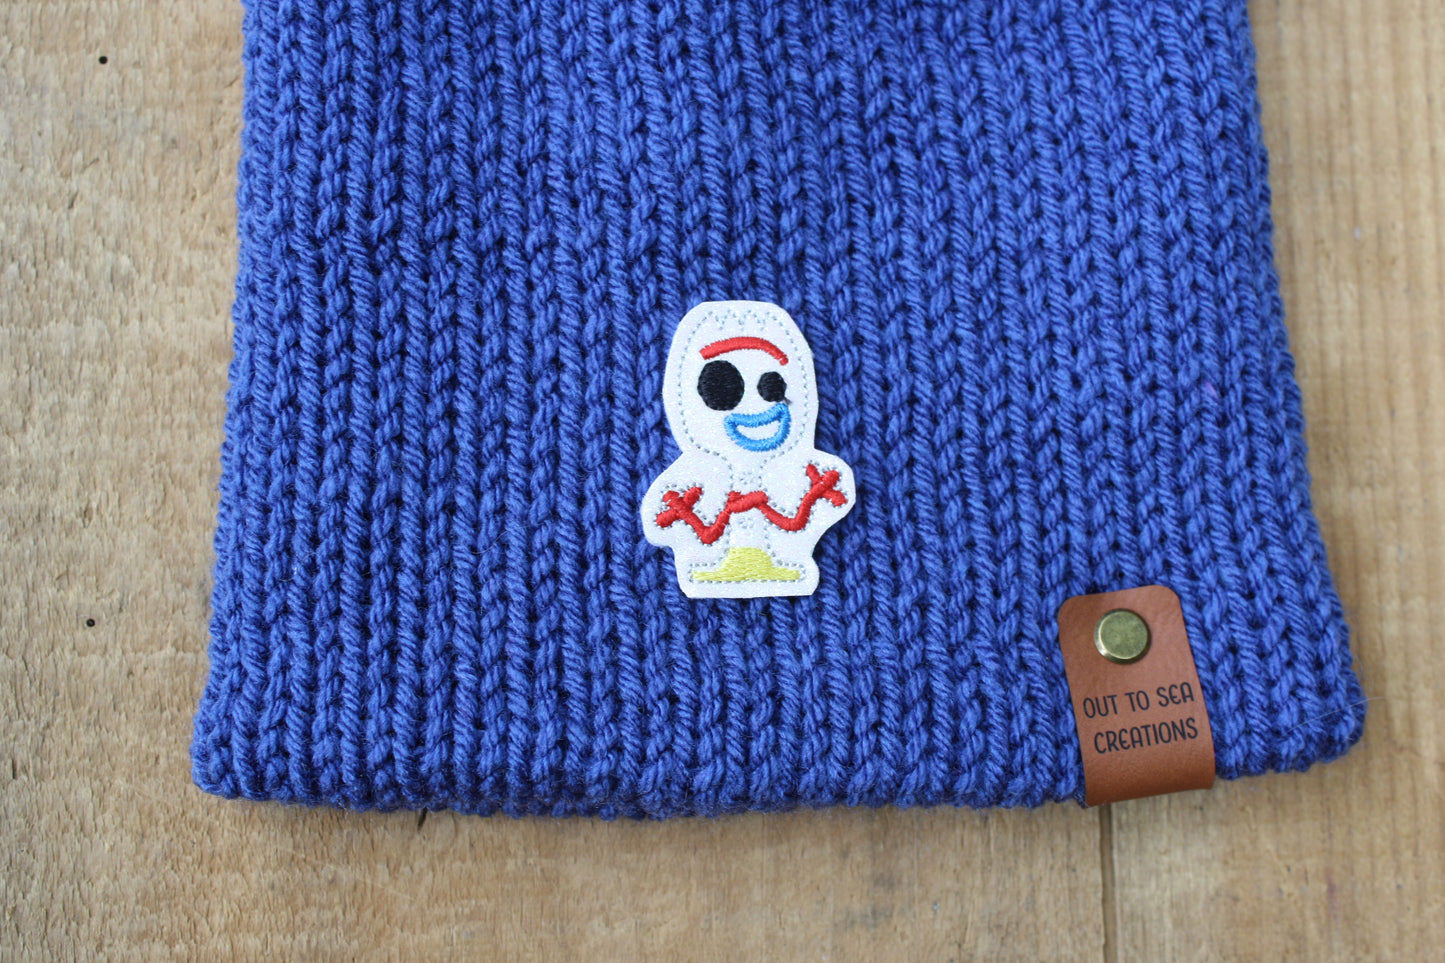 Forky knitted hat